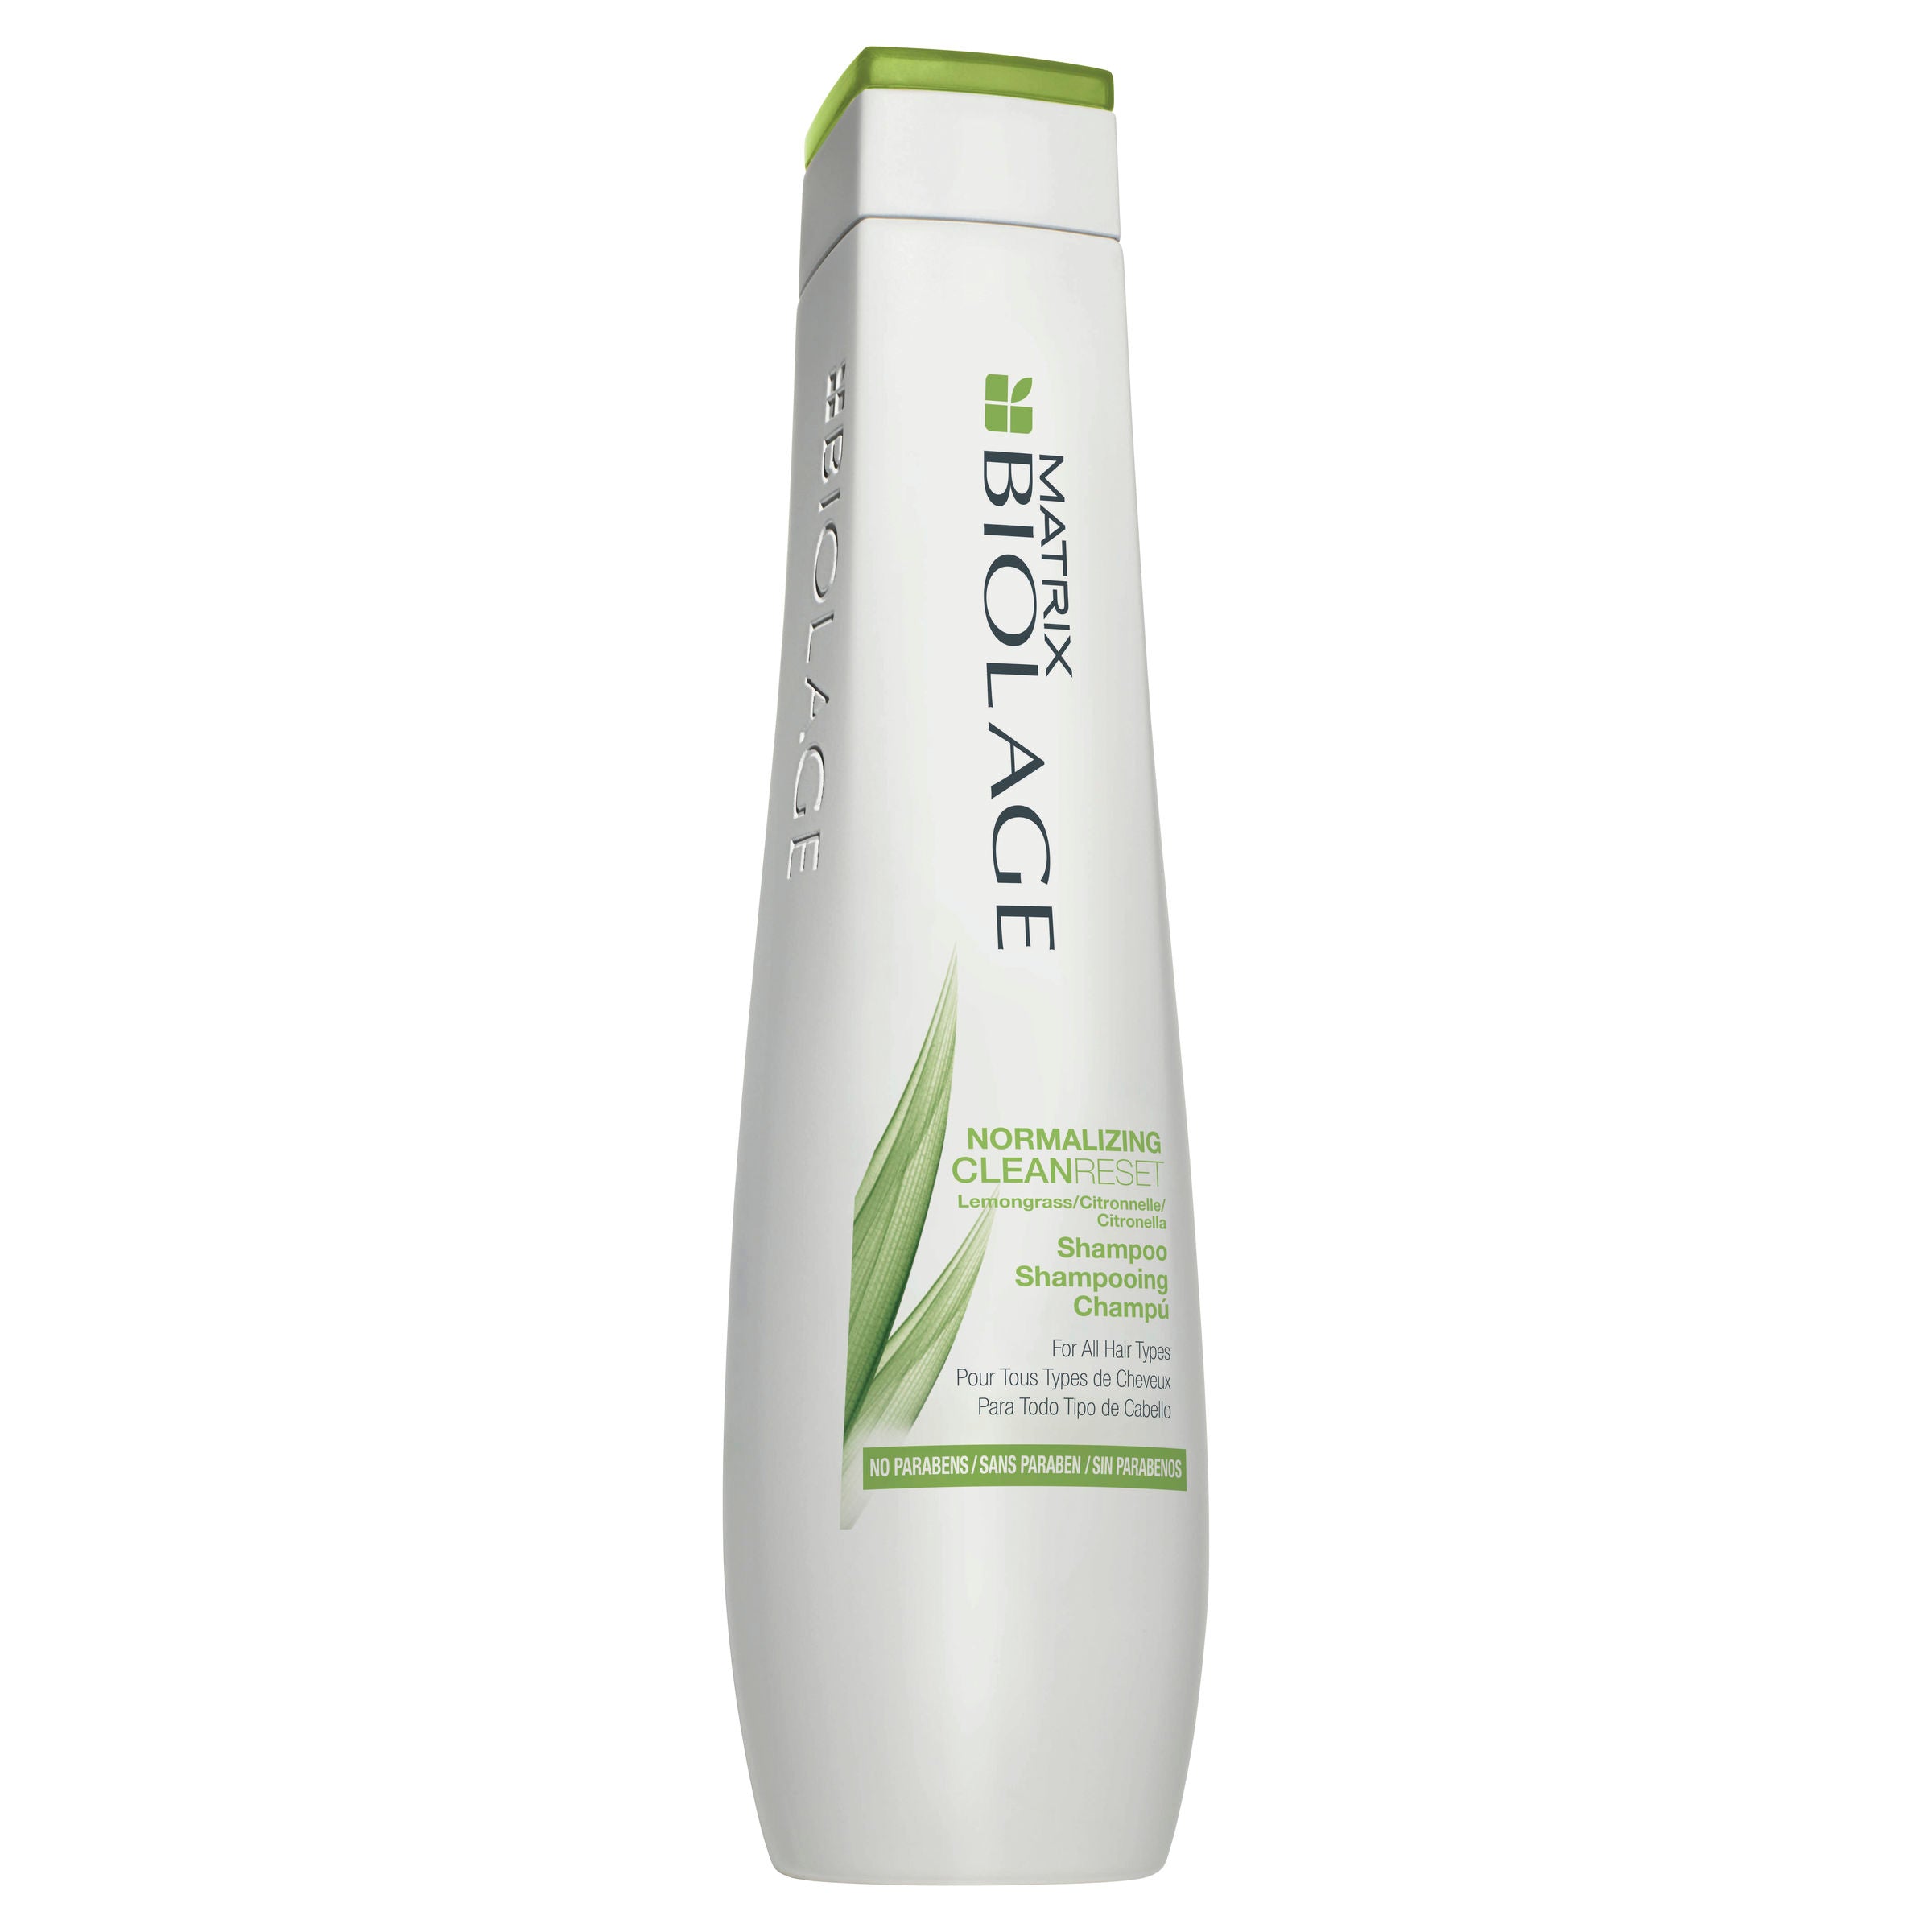 Biolage CleanReset Normalizing Shampoo removes impurities and cleanses all hair types, leaving hair feeling clean and fresh.